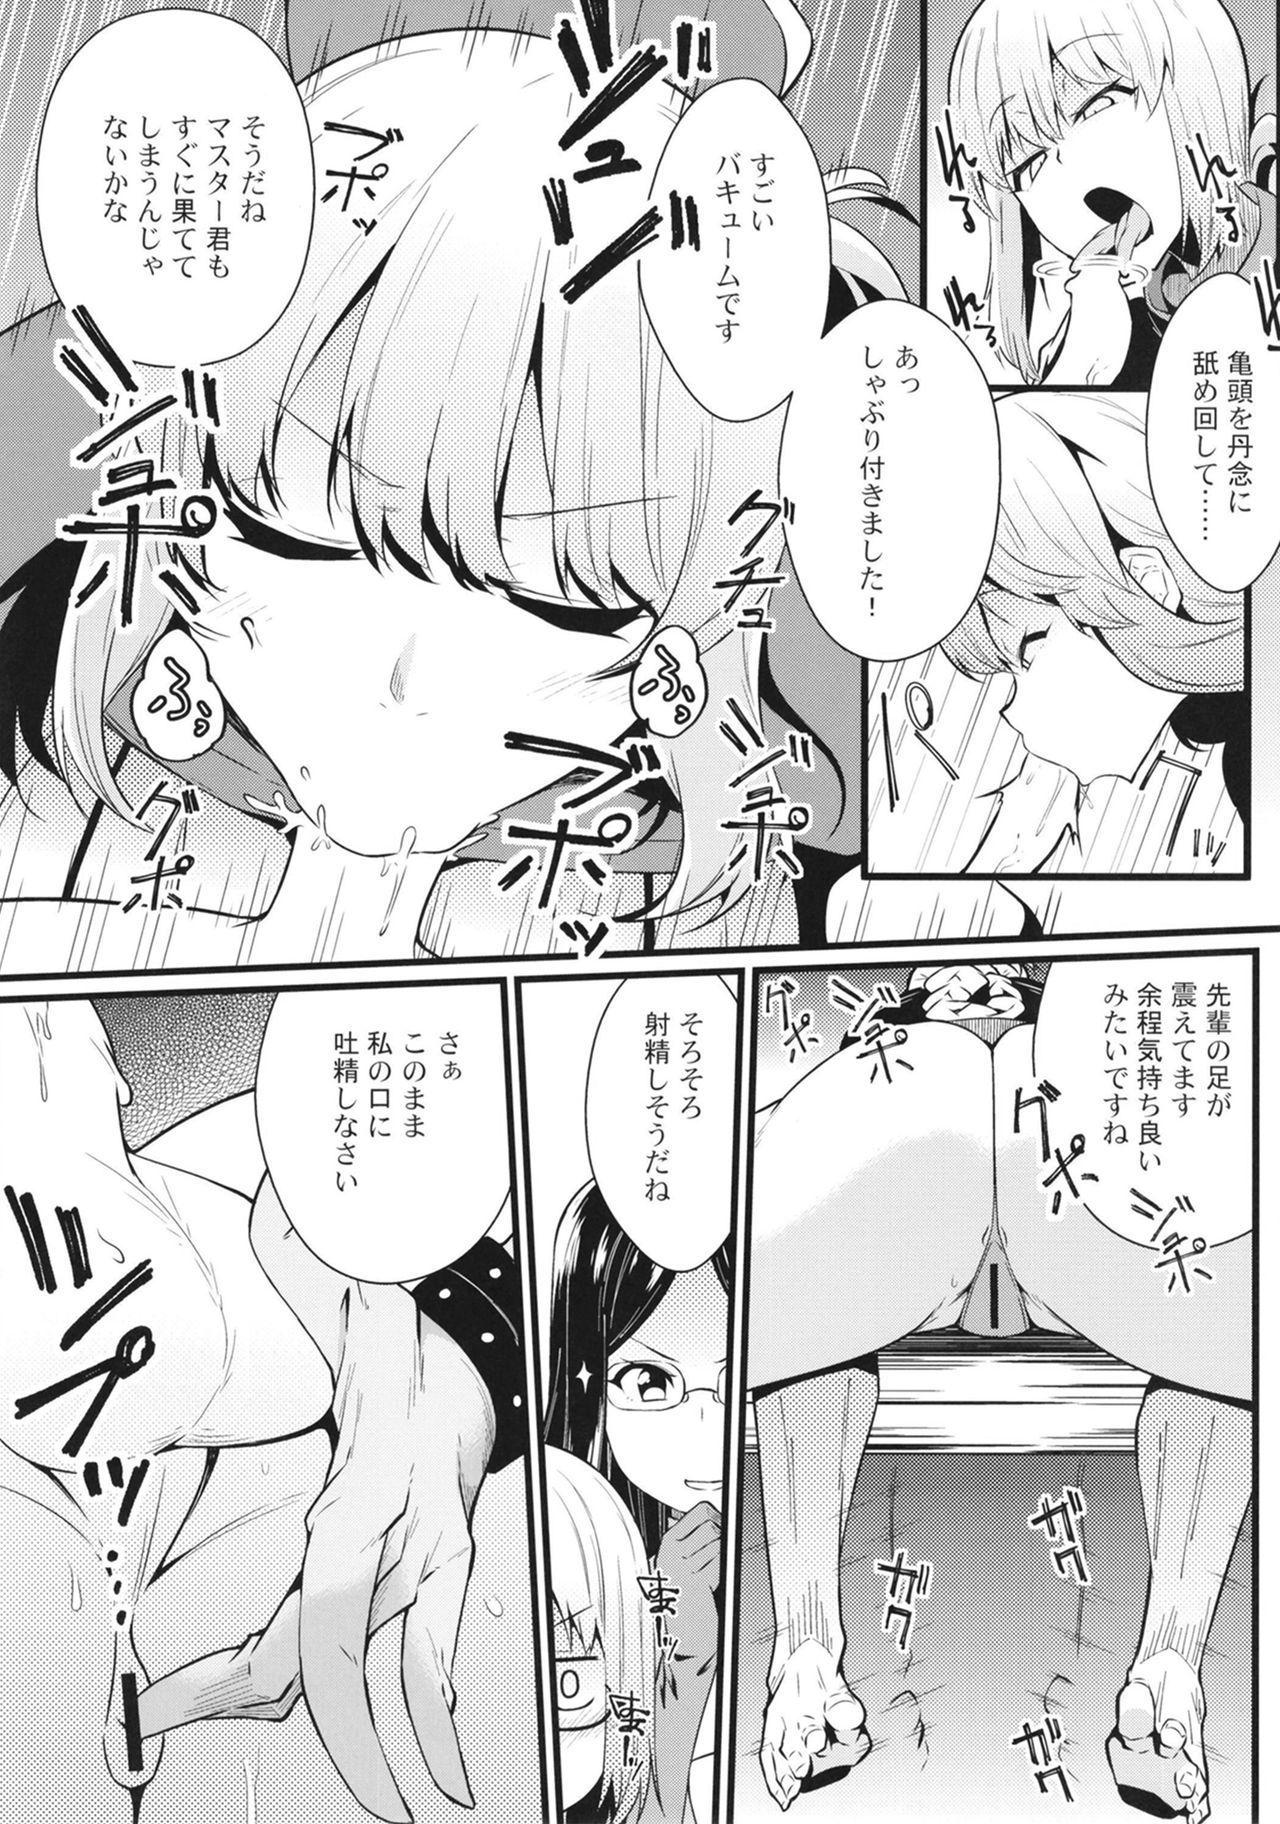 Jeans Master Bousou - Fate grand order Stud - Page 7